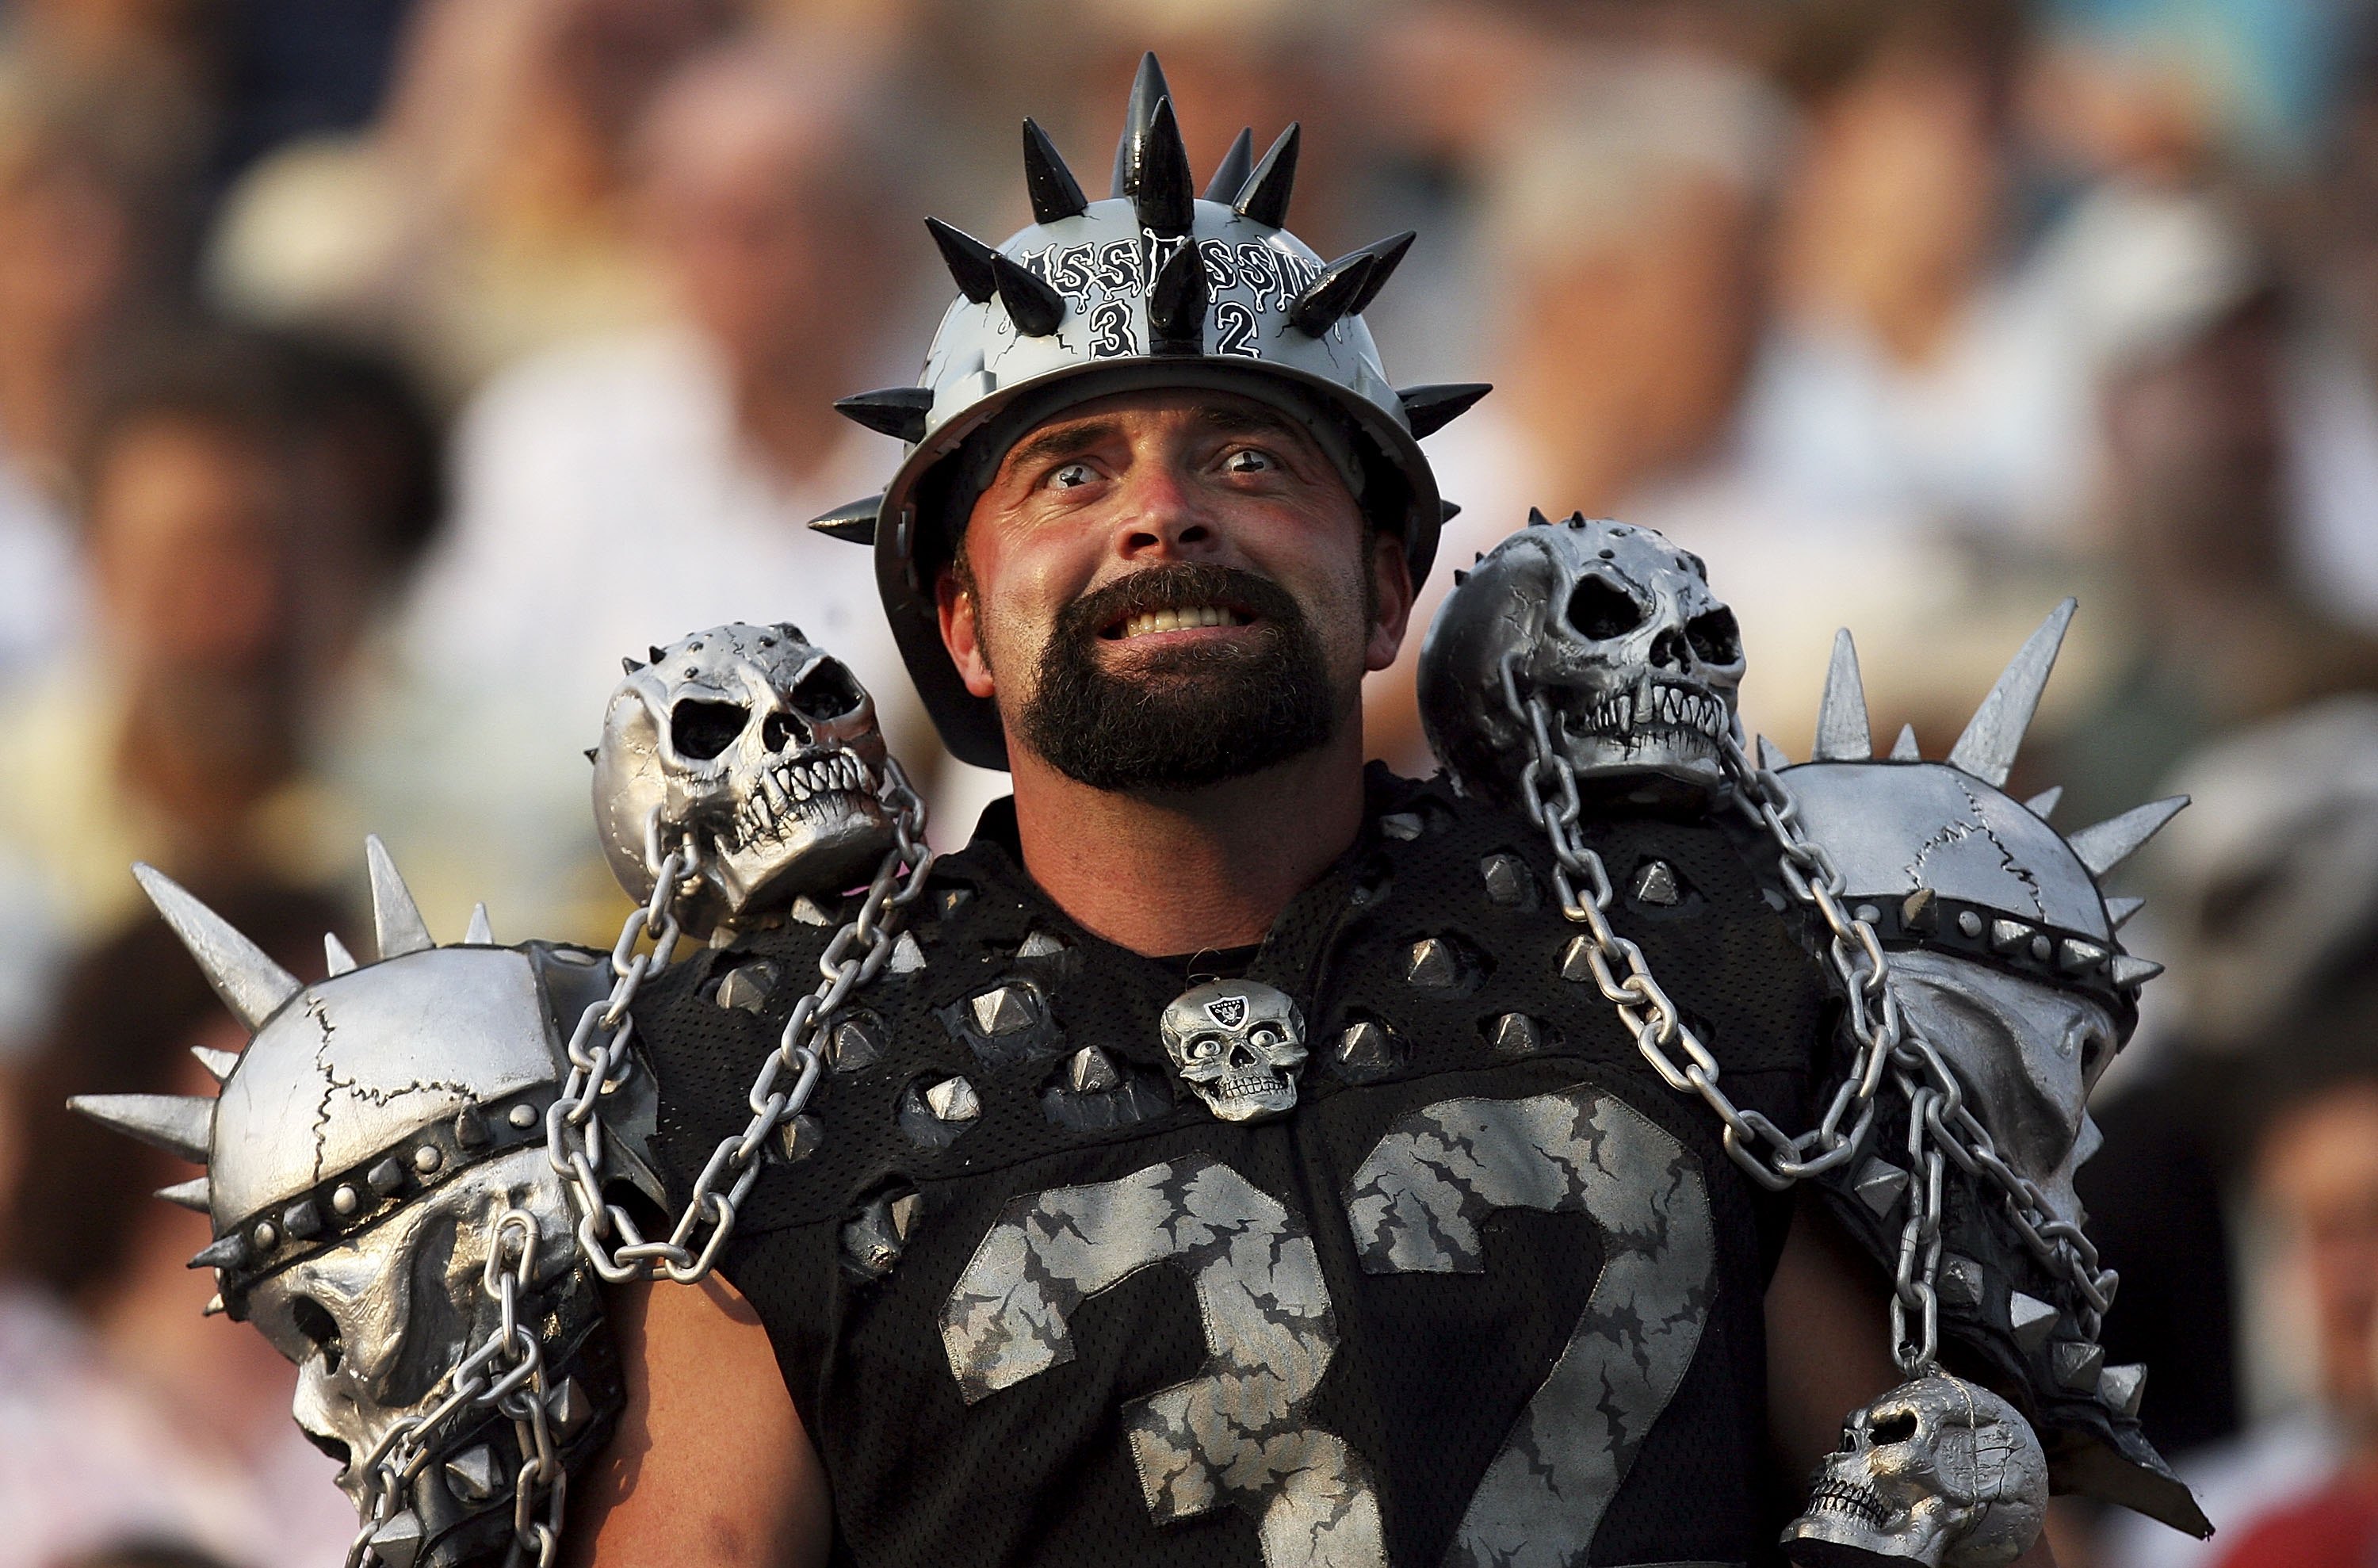 CANTON, OH - AUGUST 06:  A Raider fan gets ready before the Oakland Raiders take on the Philadelphia Eagles in the AFC-NFC Pro Football Hall of Fame Game at Fawcett Stadium on August 6, 2006 in Canton, Ohio.  (Photo by Doug Benc/Getty Images)